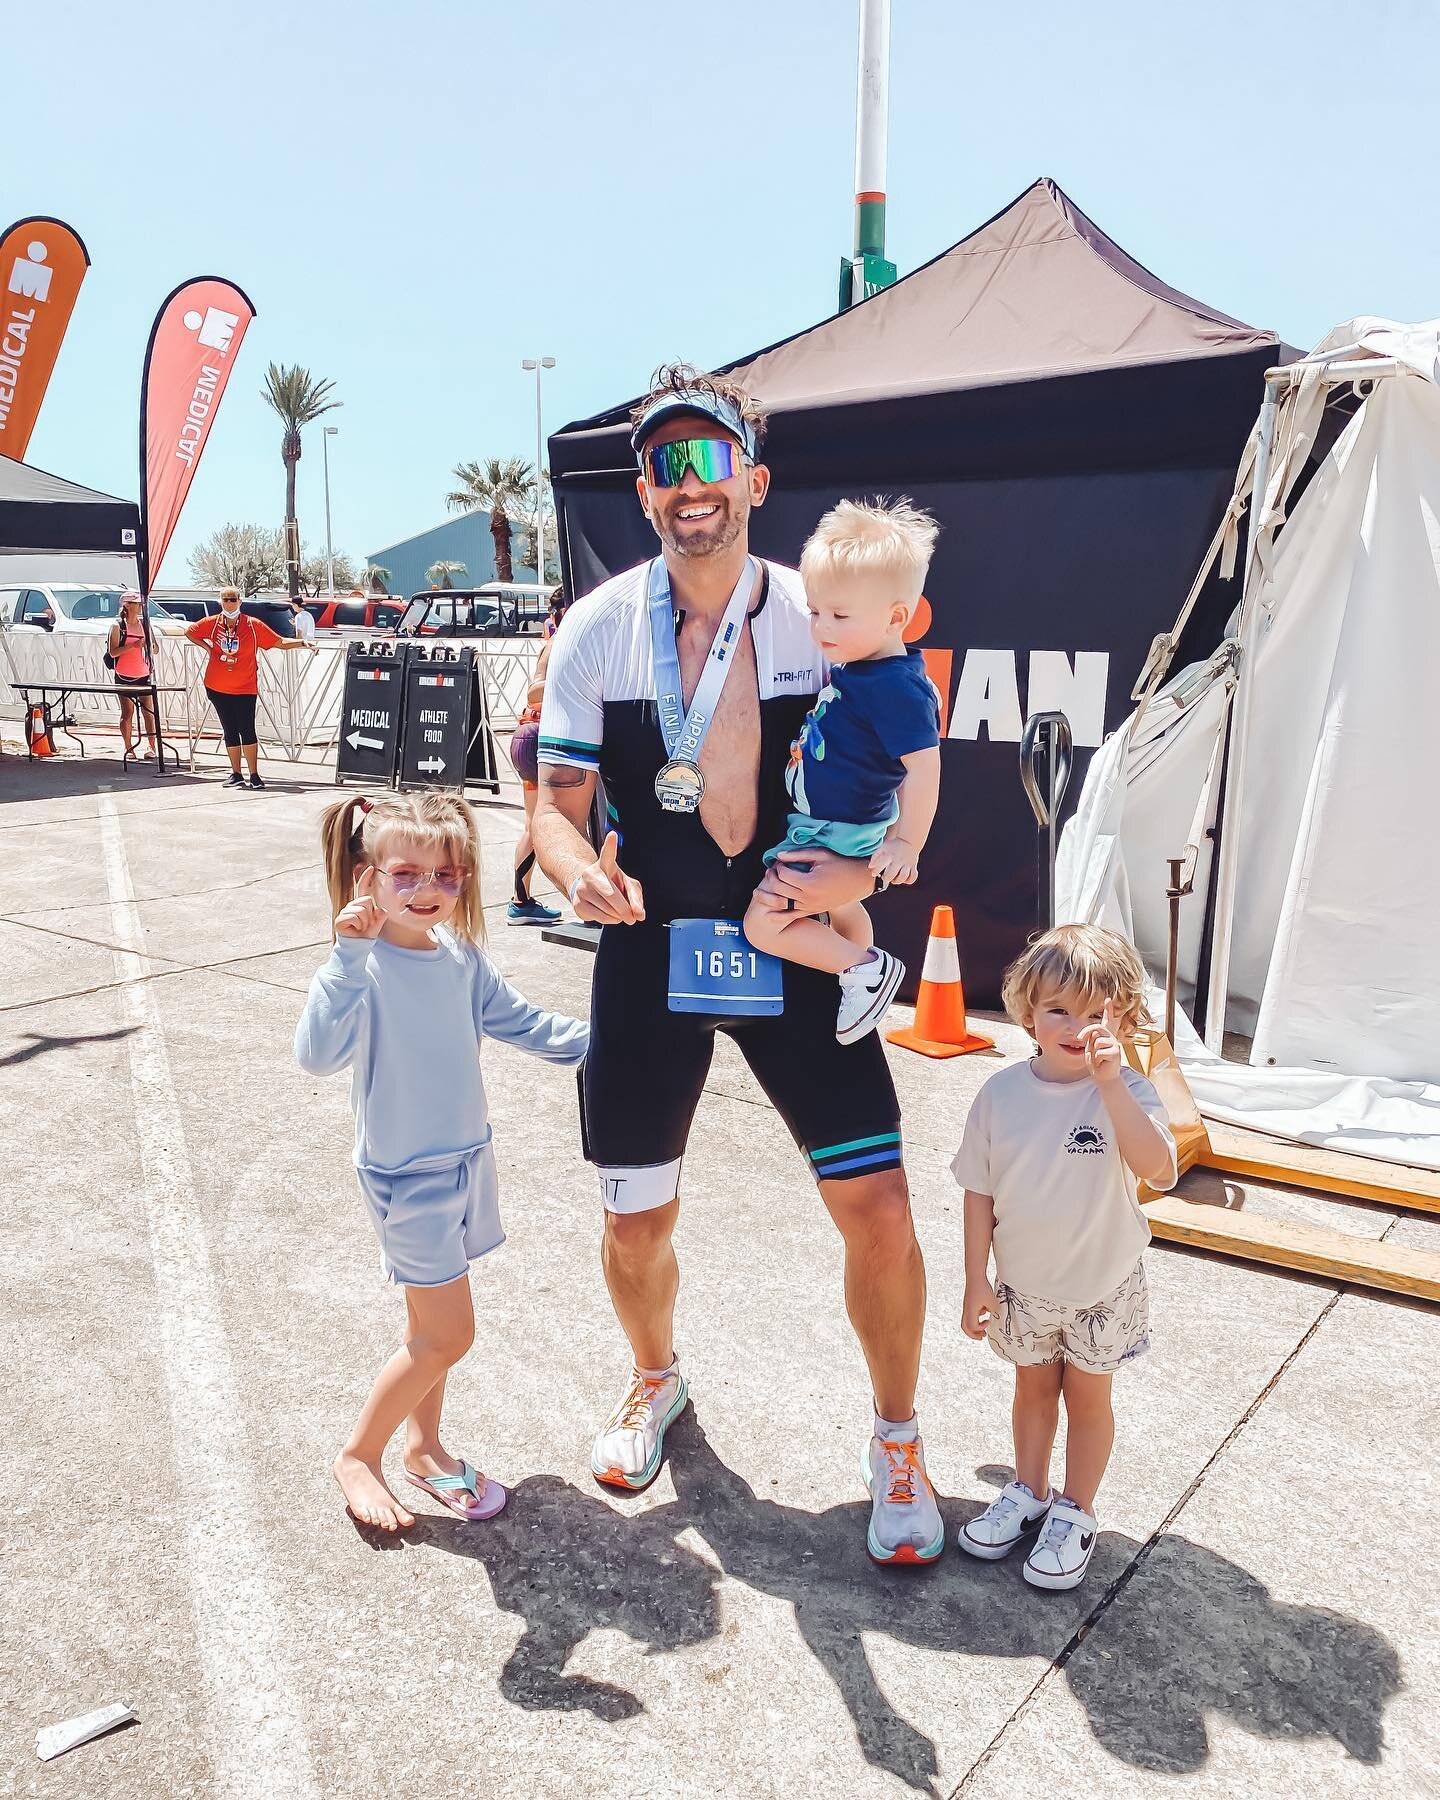 This guy. 👆🏼
An Ironman finisher.
And he almost wasn&rsquo;t.

If you&rsquo;ve been following our vacay, you know it&rsquo;s been craaaazy! 🤪 But some sign of God or some higher power was looking out for Beau and made sure he  raced.

We got to se